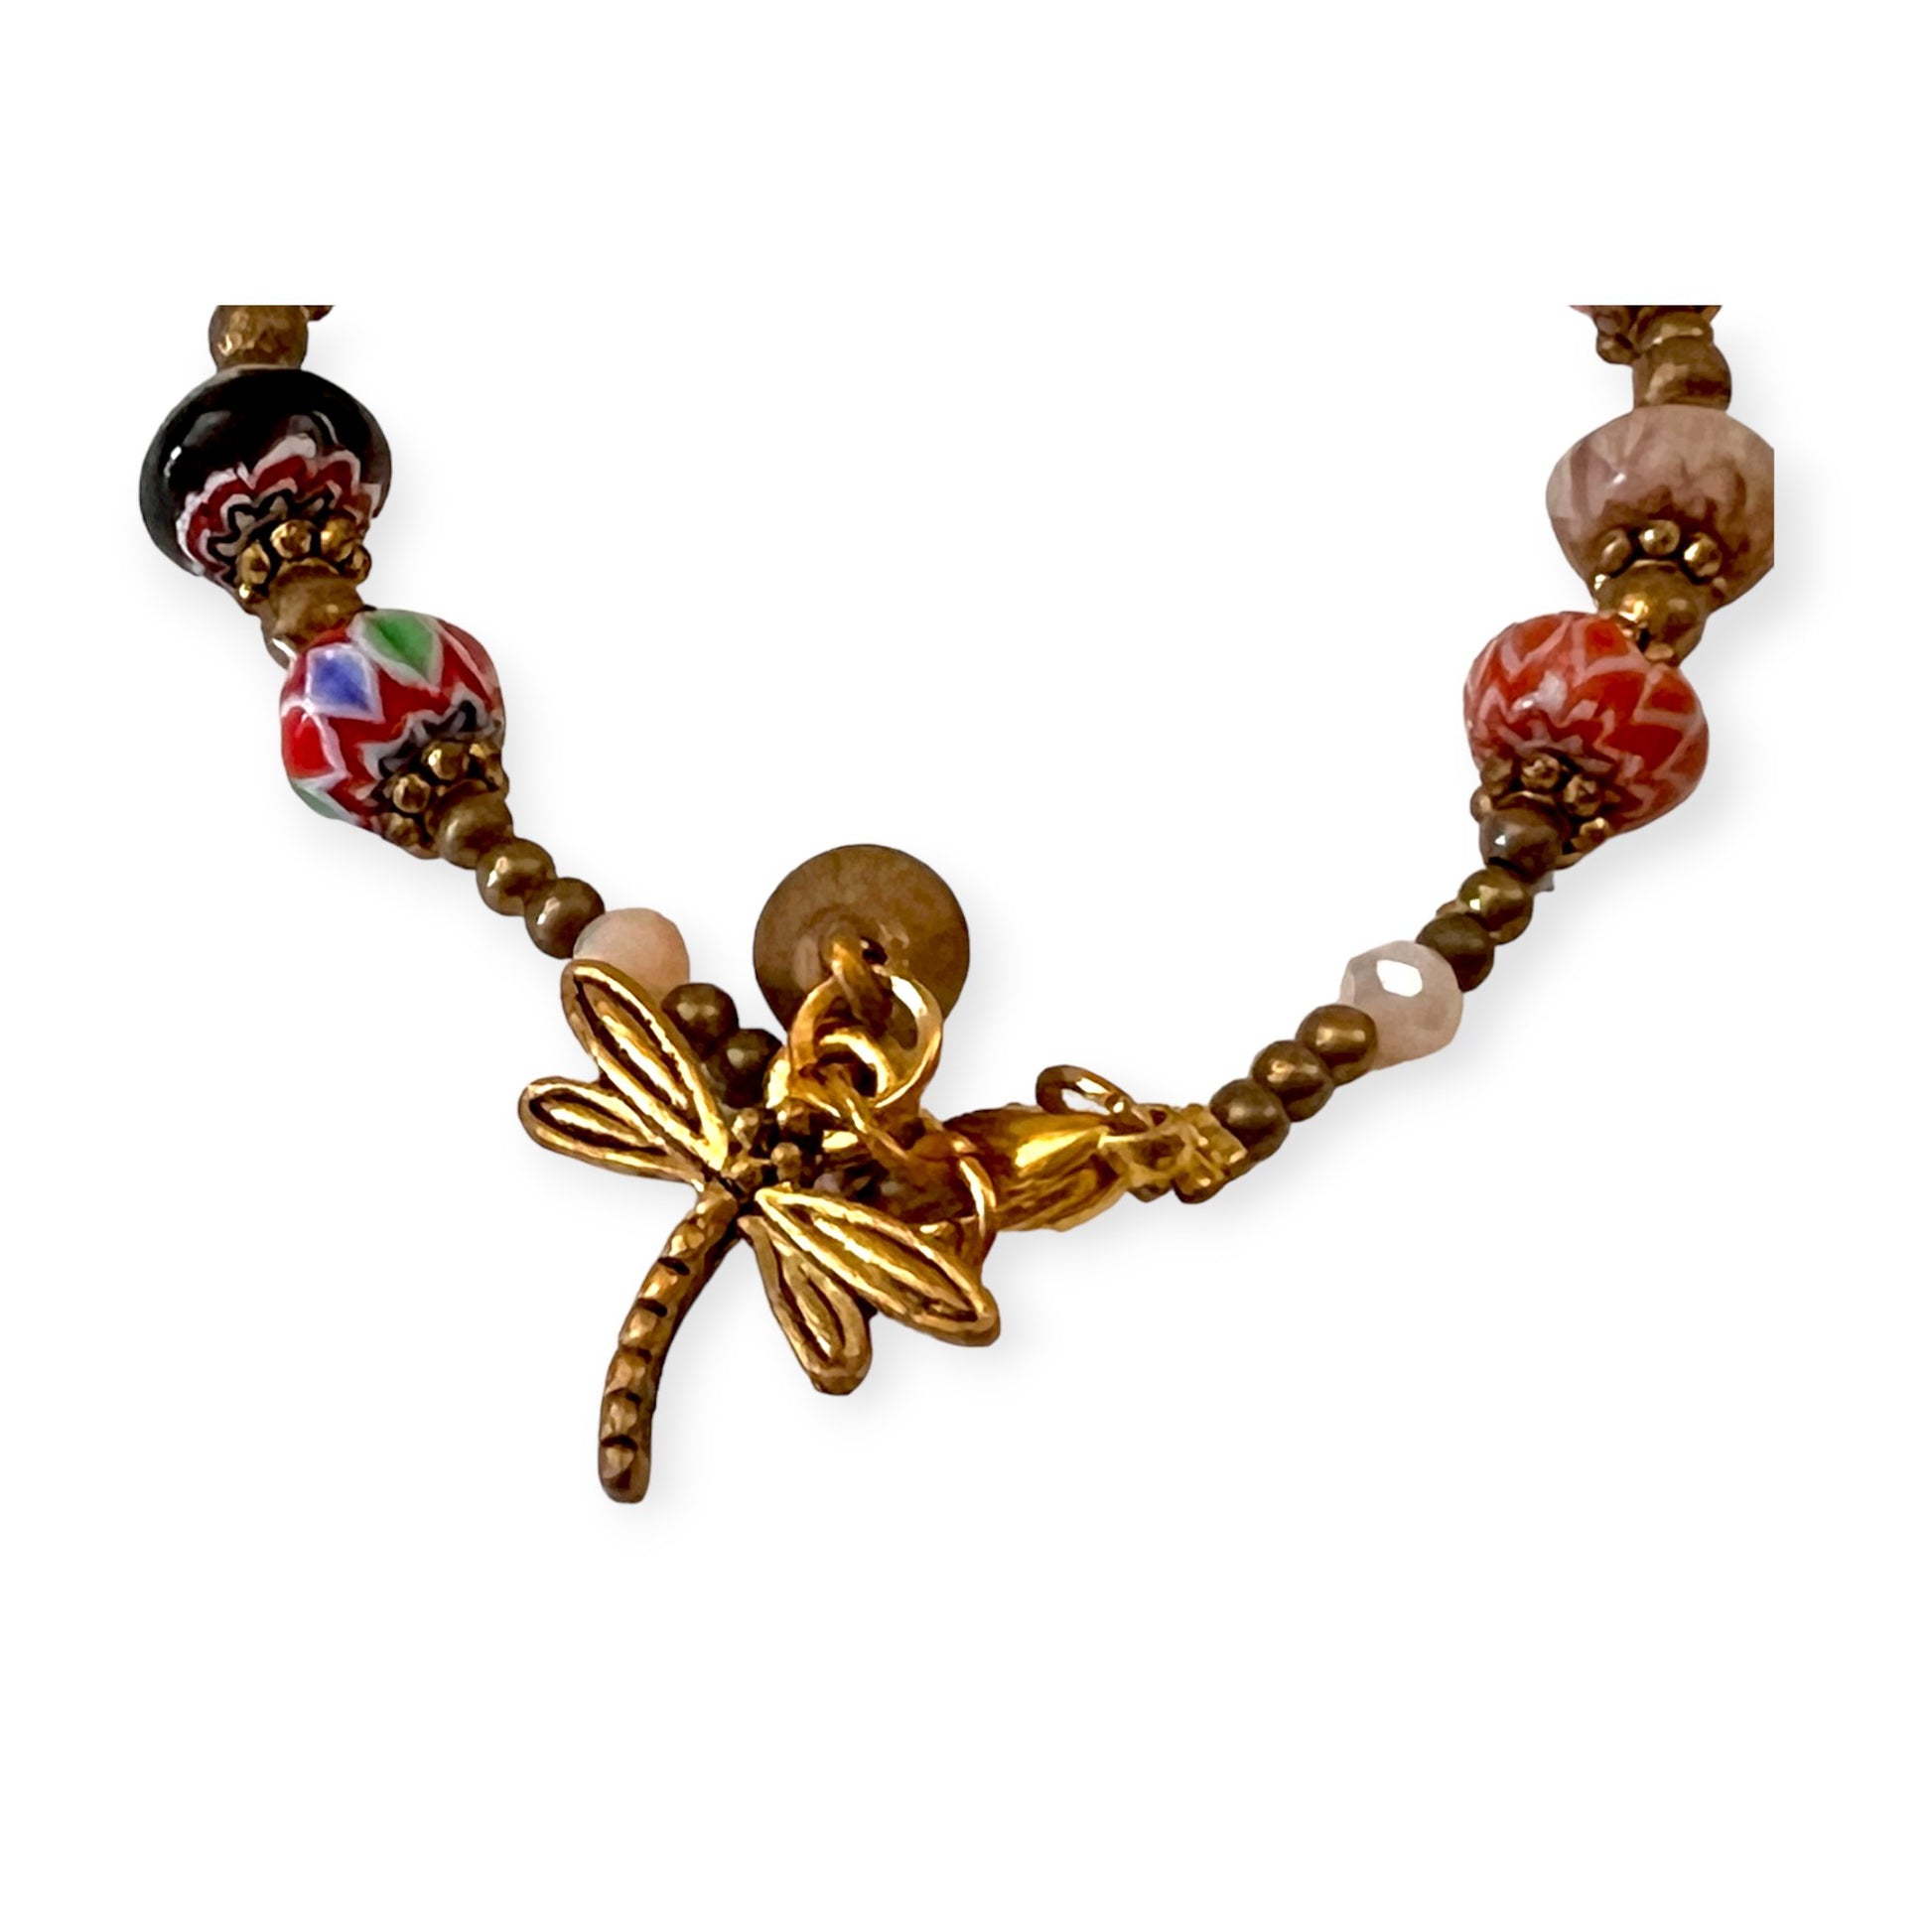 Colorful trade beads bracelet with brass accents - Sundara Joon